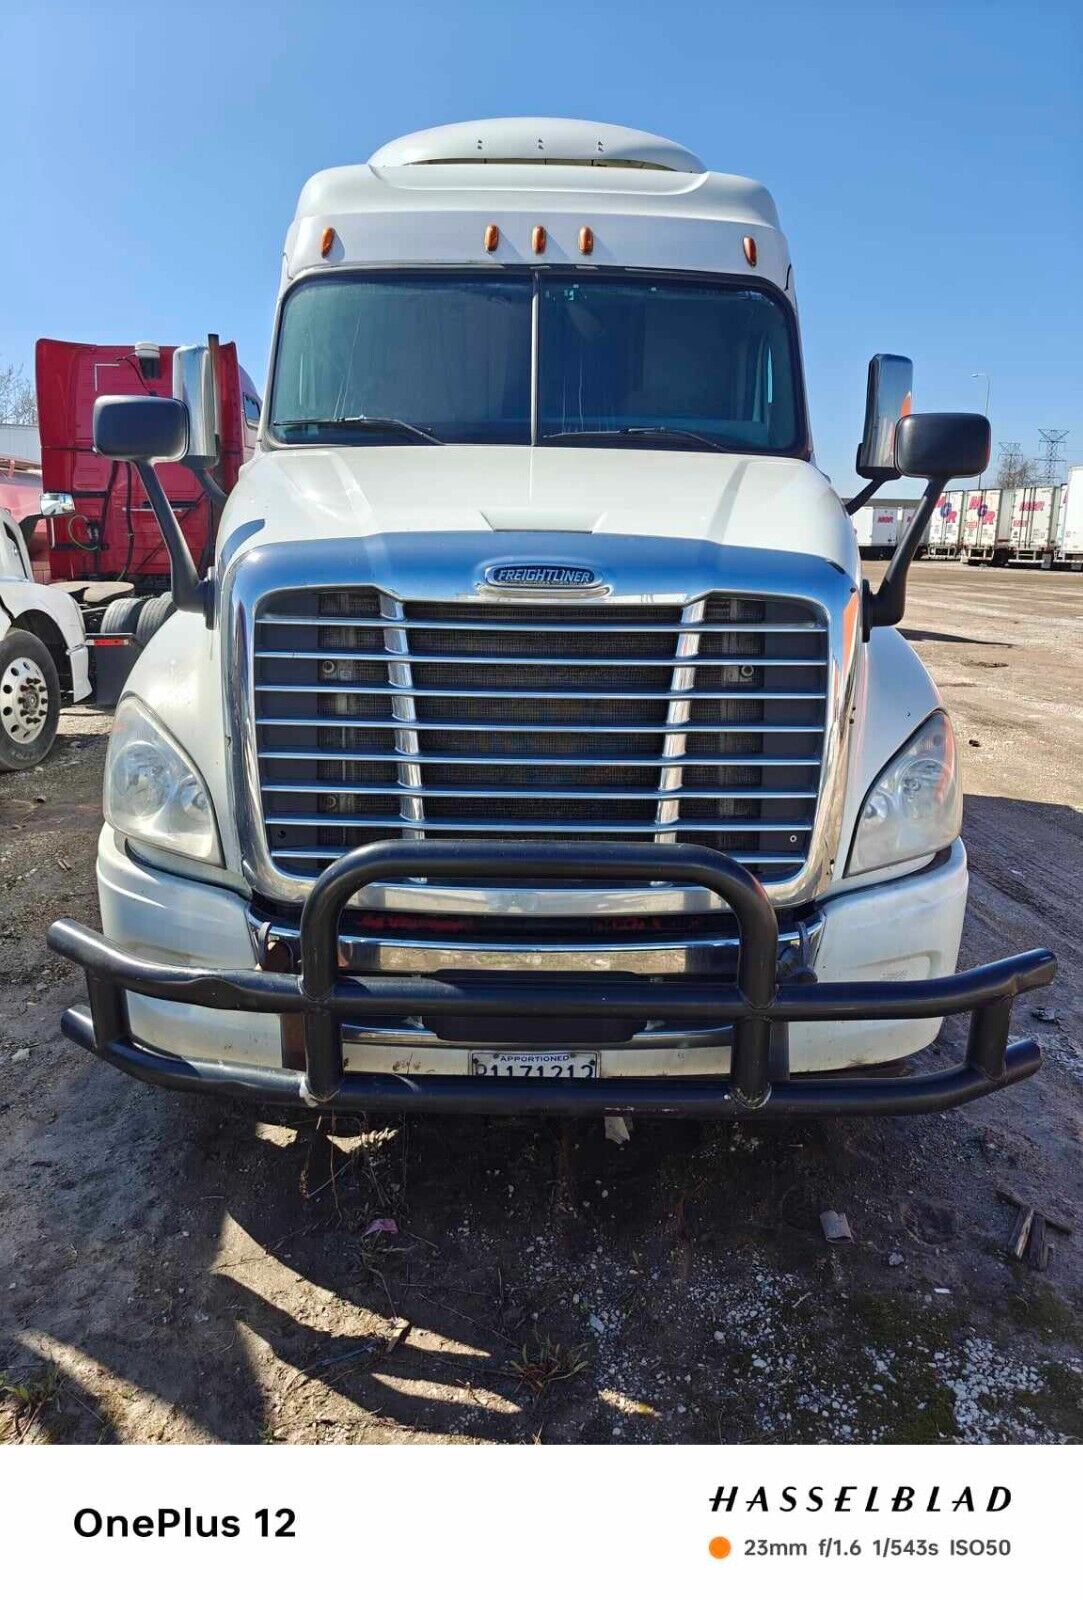 2015 freightliner Cascadia manual  for fixing or parts, non runner